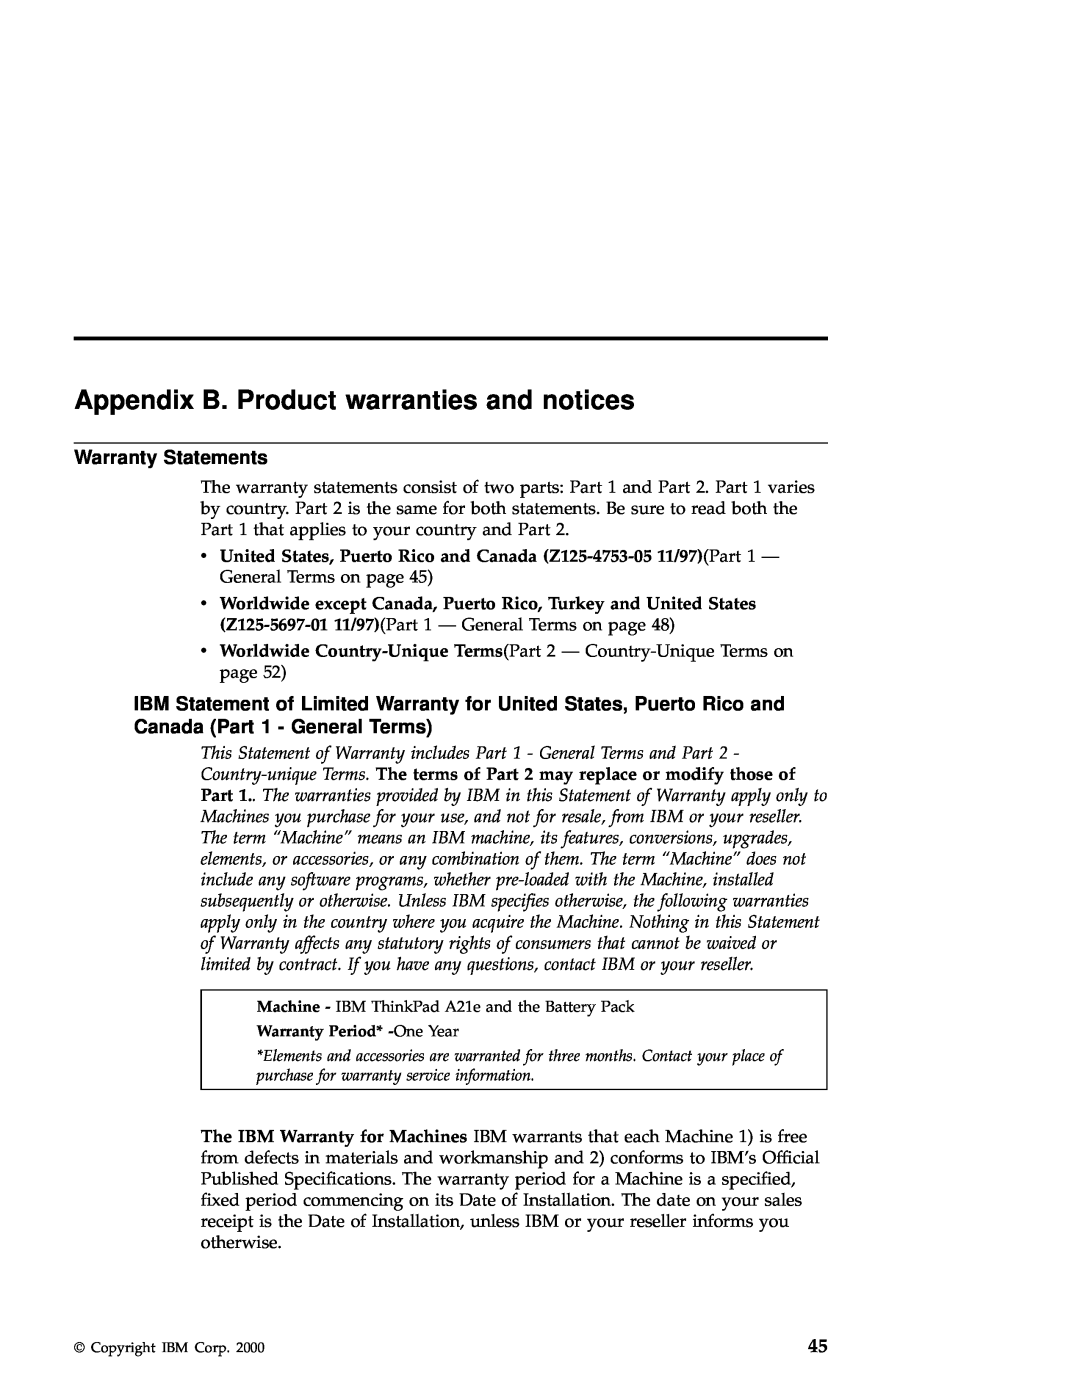 IBM A21e manual Appendix B. Product warranties and notices, Warranty Statements 